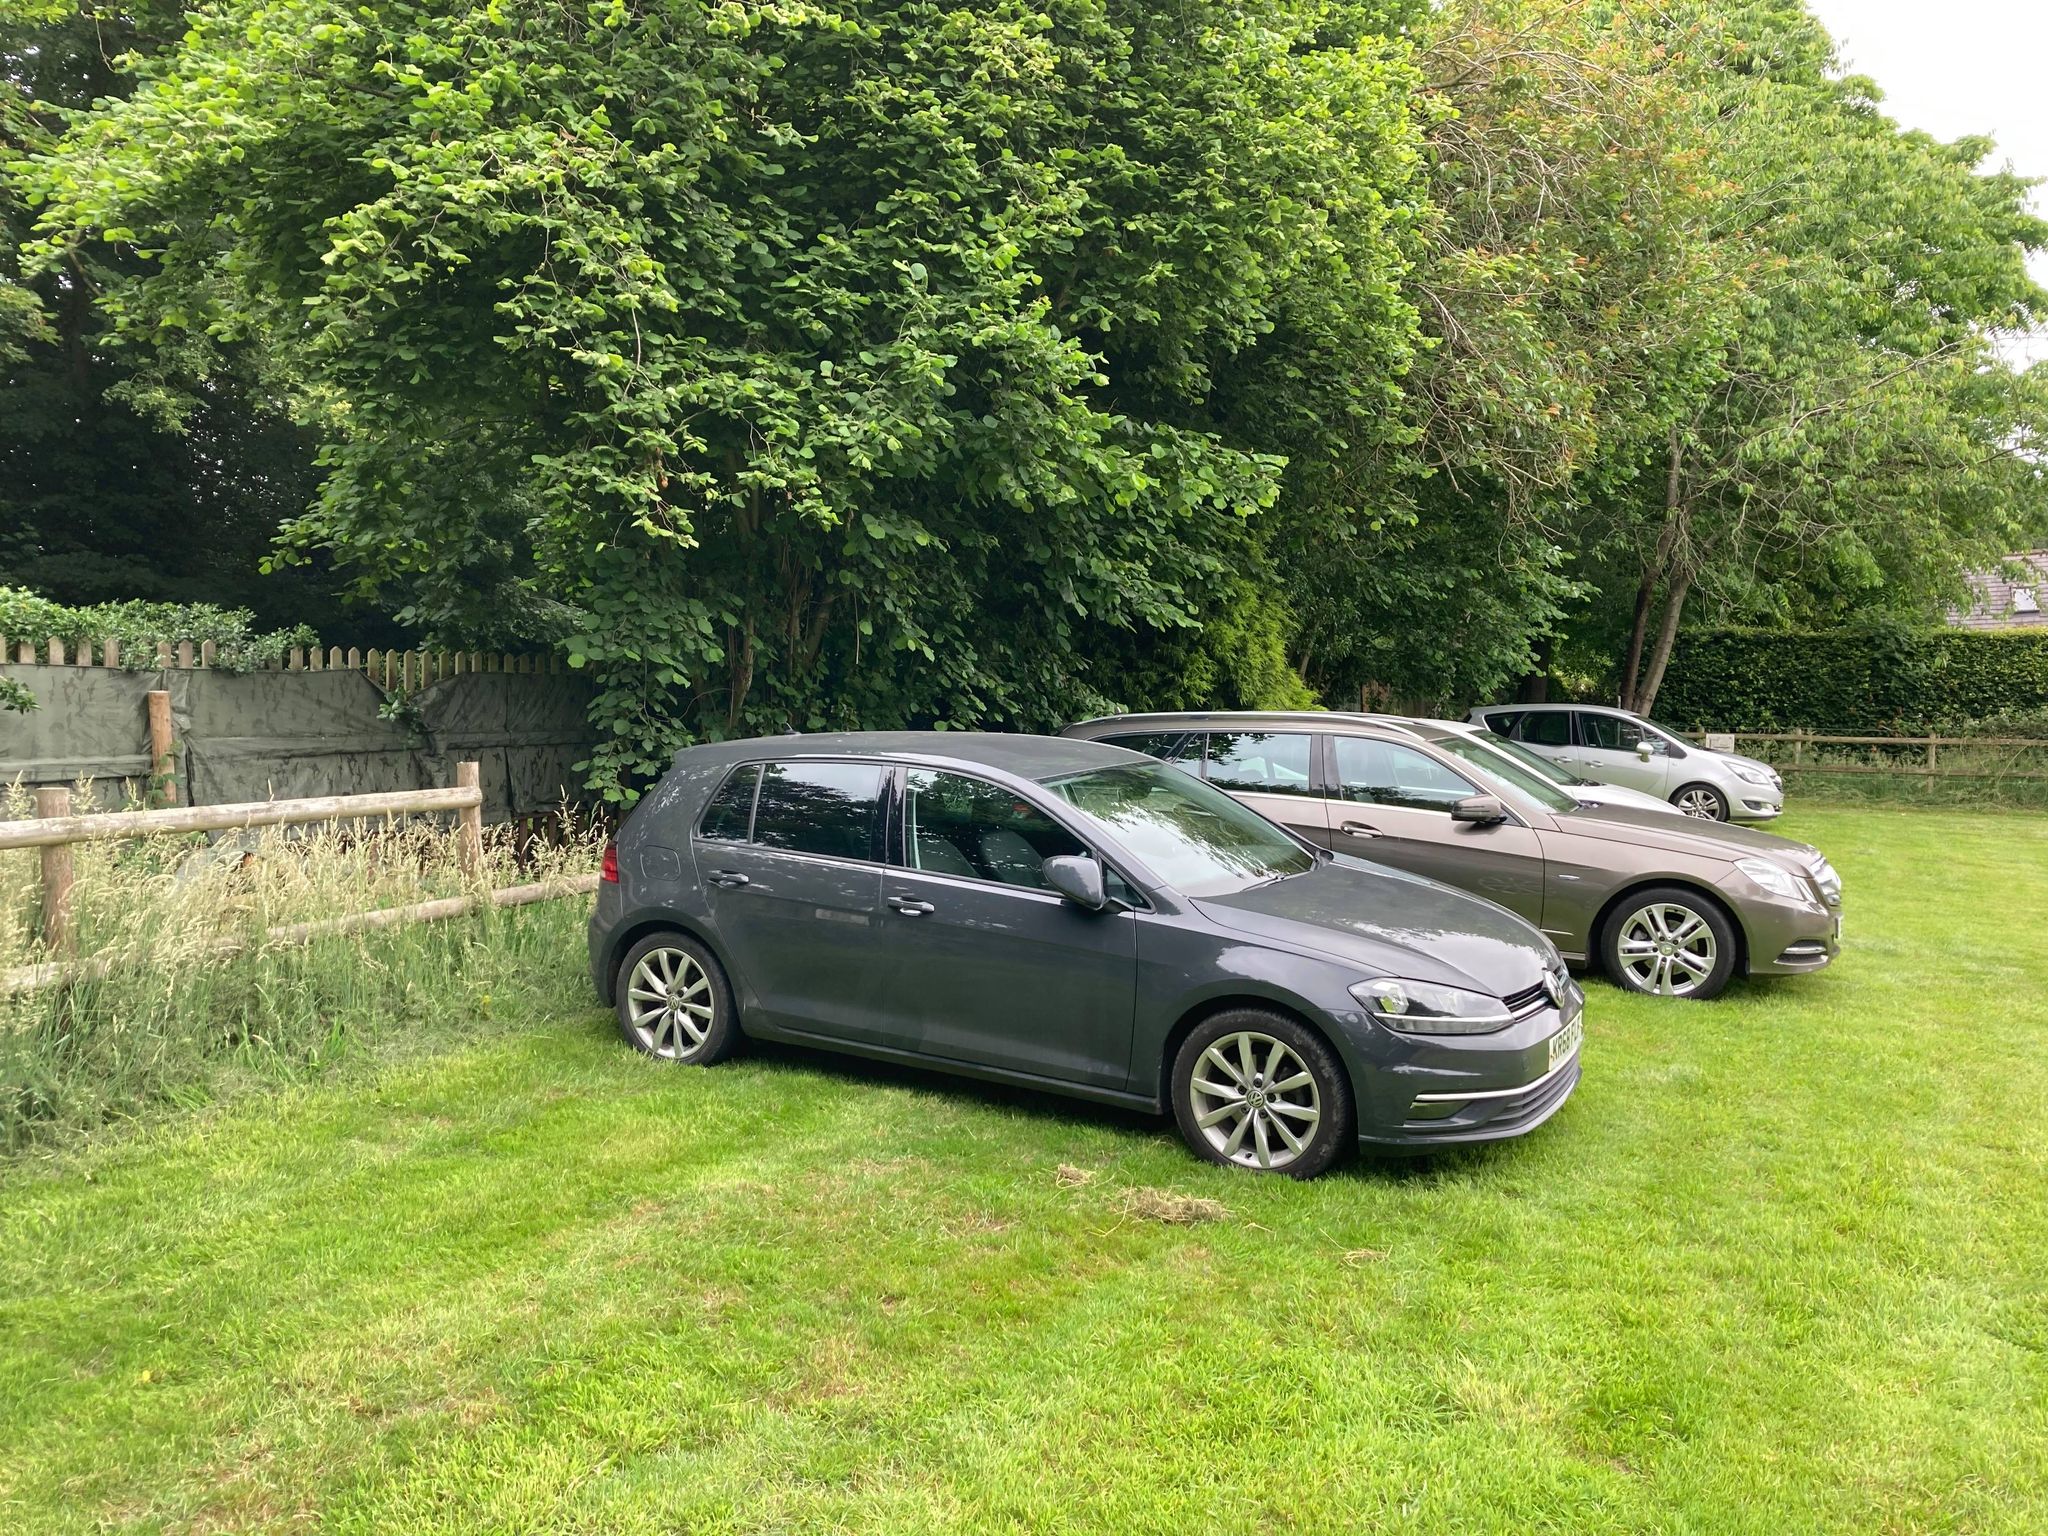 Cars parked at Rothley Wine Estate